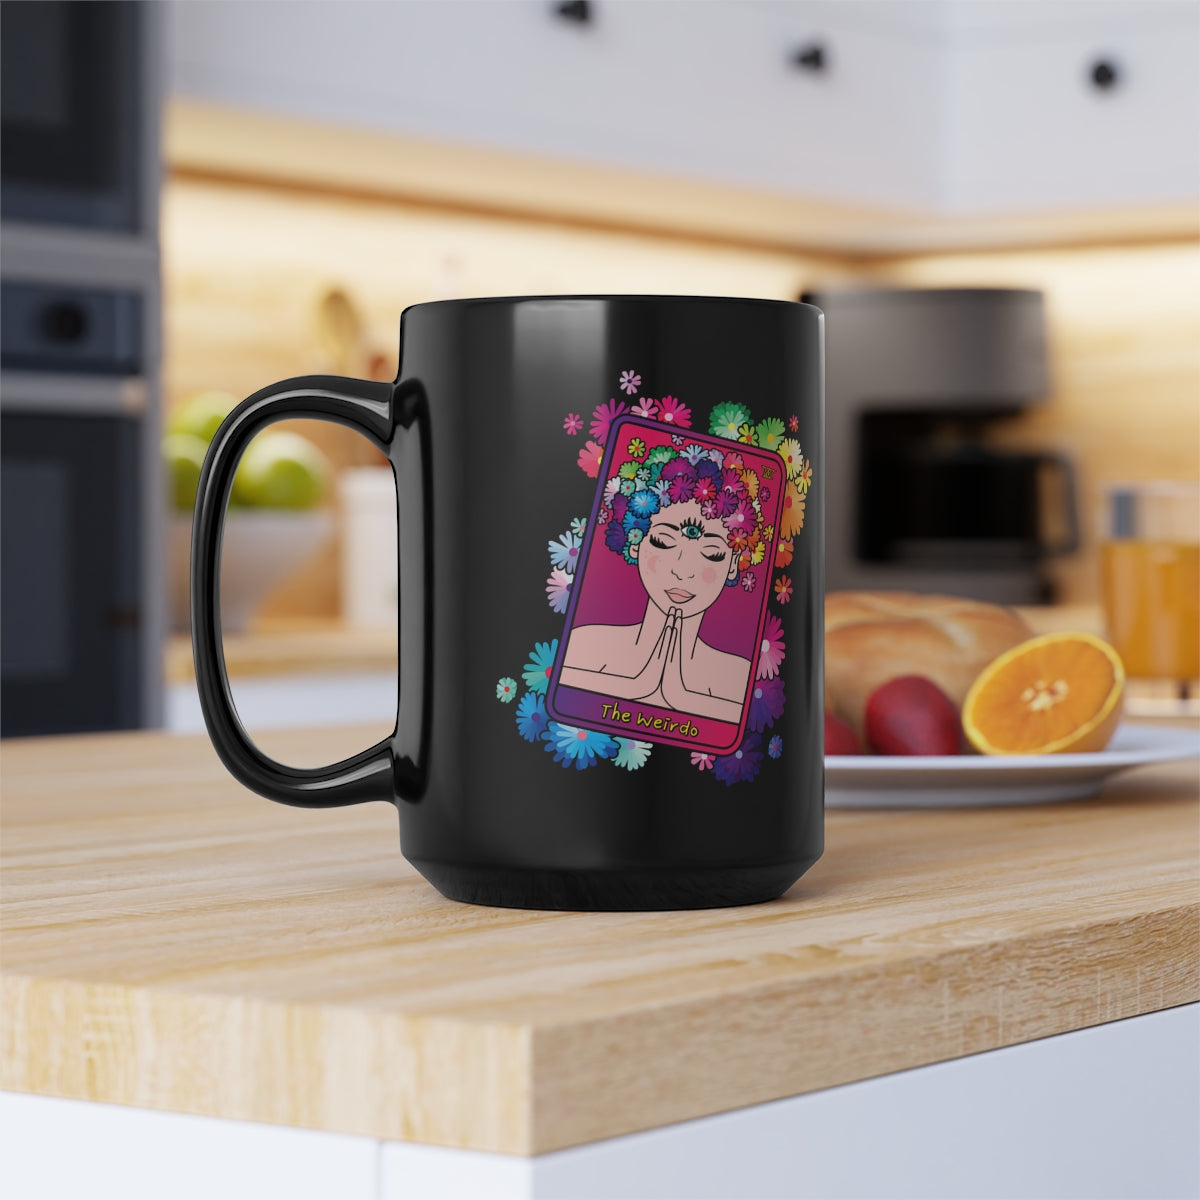 WEIRDO | This black mug has THE WEIRDO tarot card printed on both sides of the mug. Perfect for coffee or tea if you are a weirdo who is into spirituality and more weird shit.